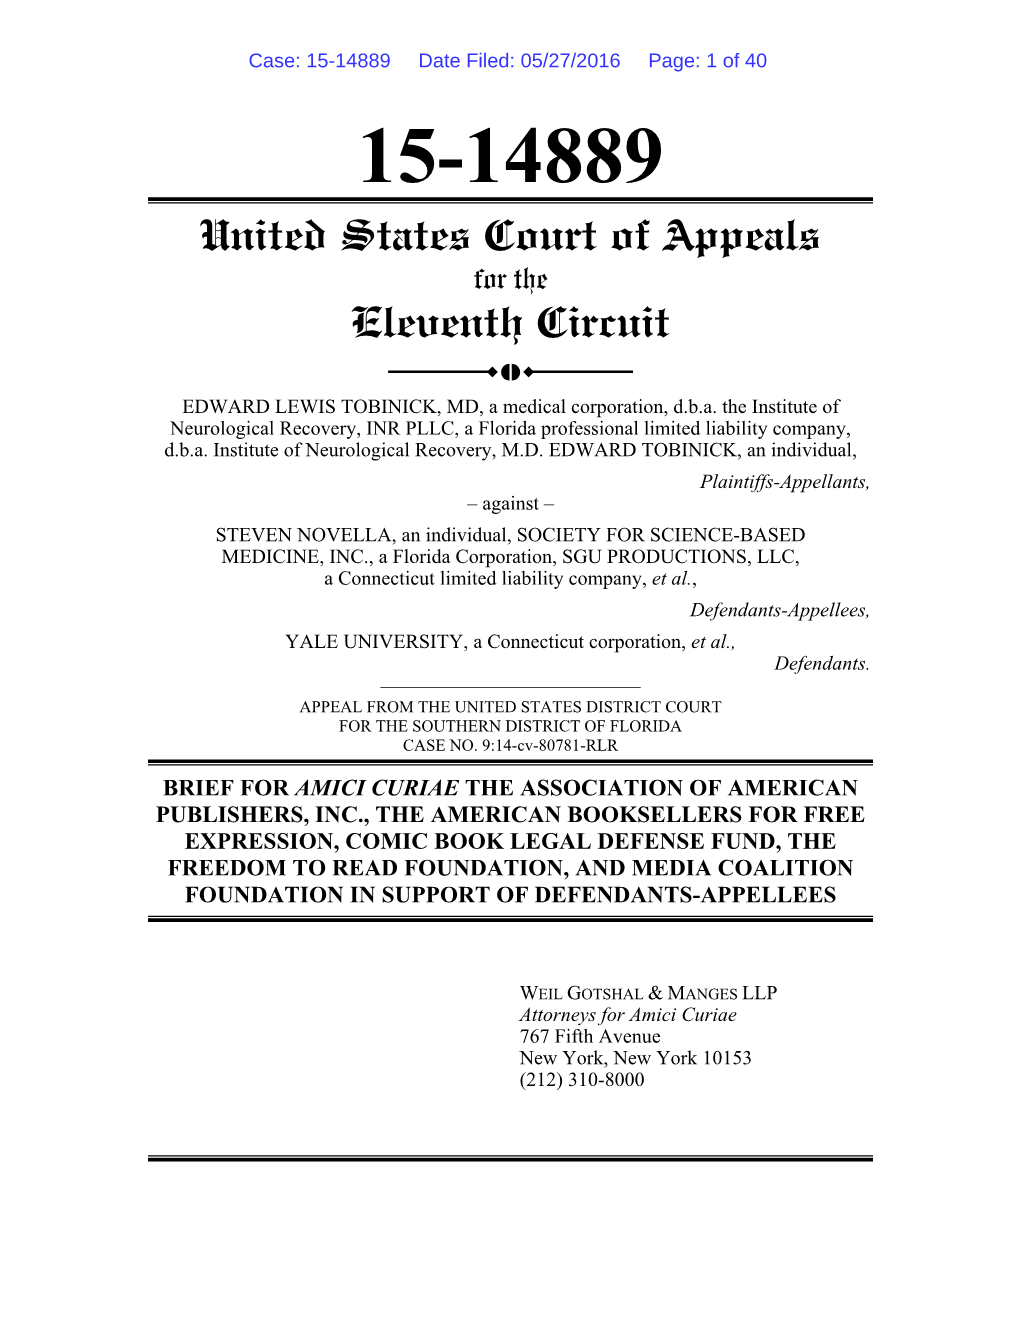 Amicus Brief Is Filed by the Association of American Publishers, Inc